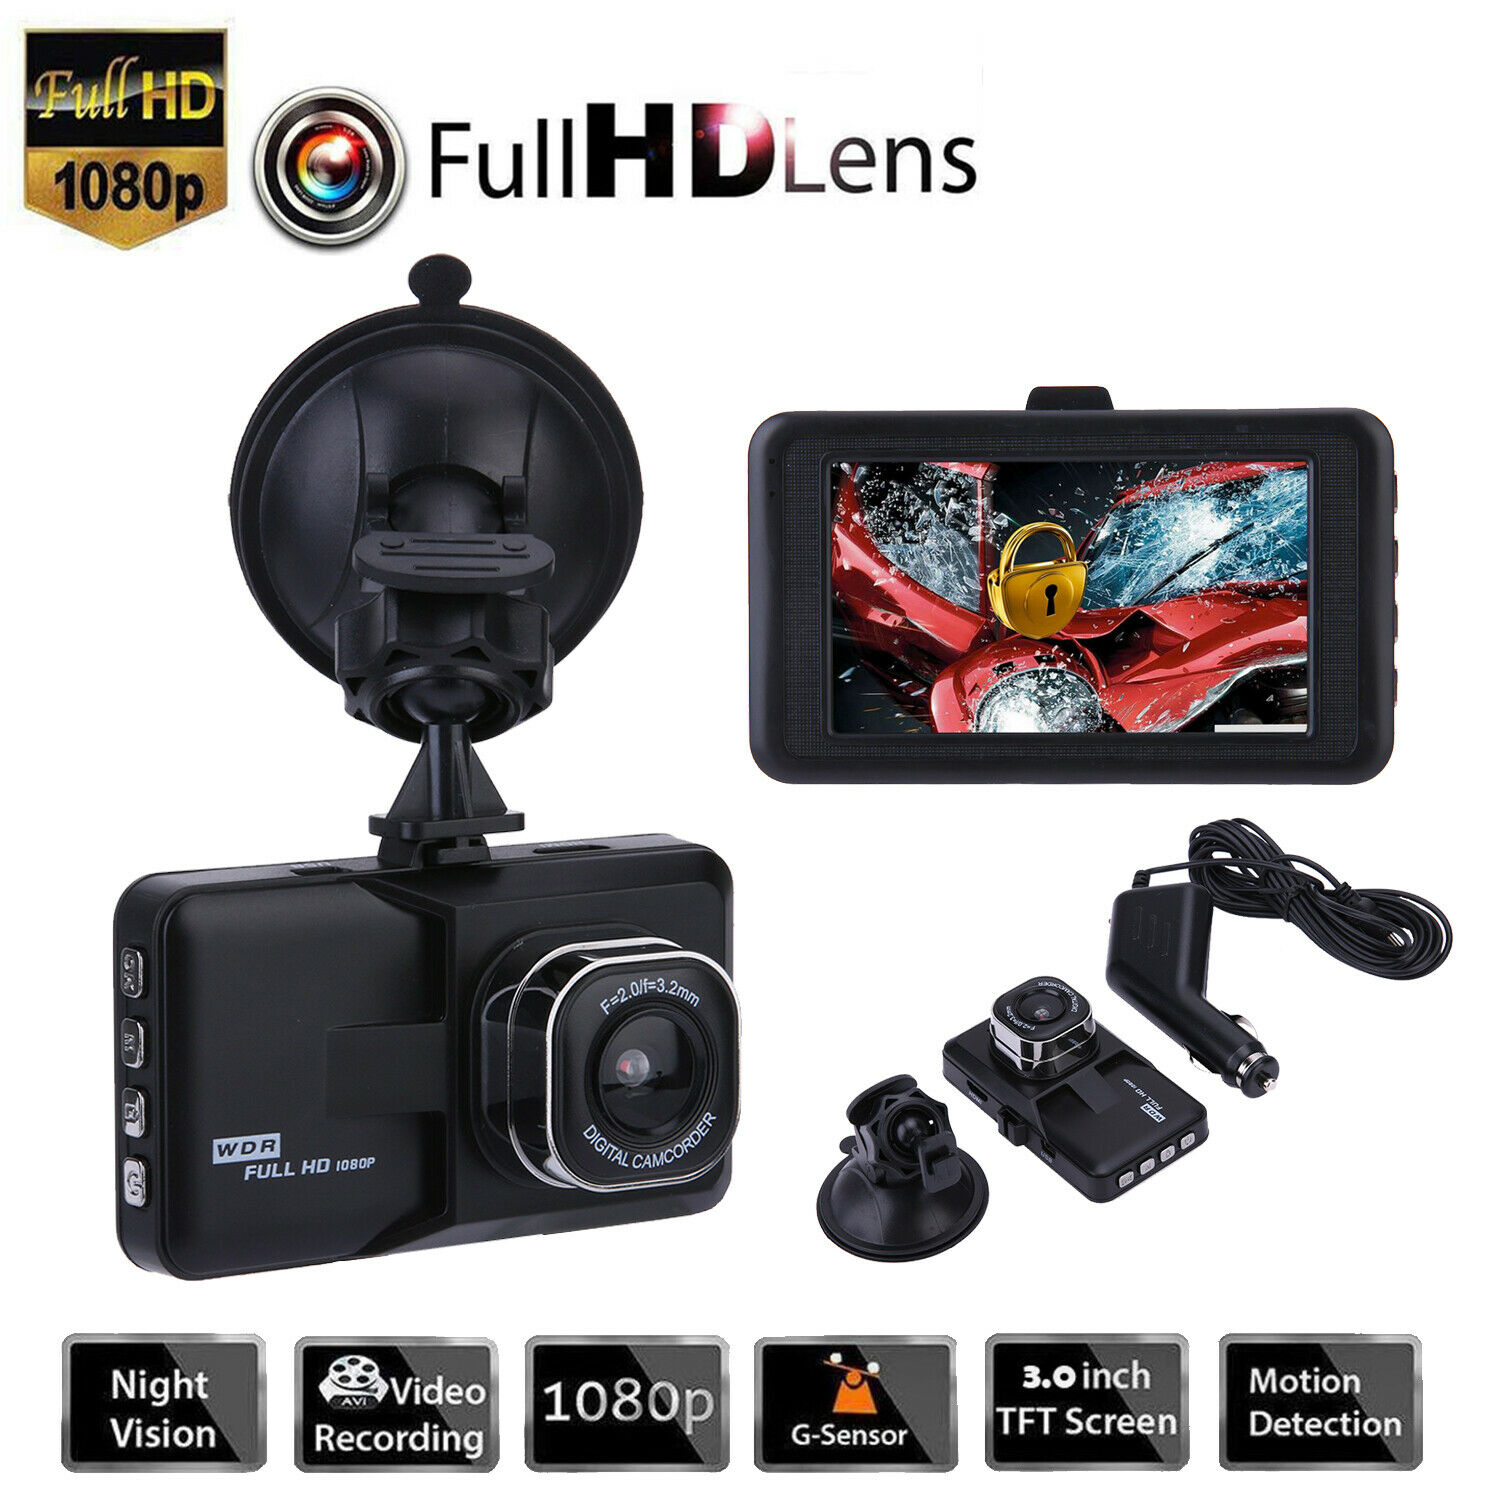 Vehicle Dash Cam Blackbox DVR with WDR - Full HD 1080 VISOR DVR with Exciting Features. NEW Products